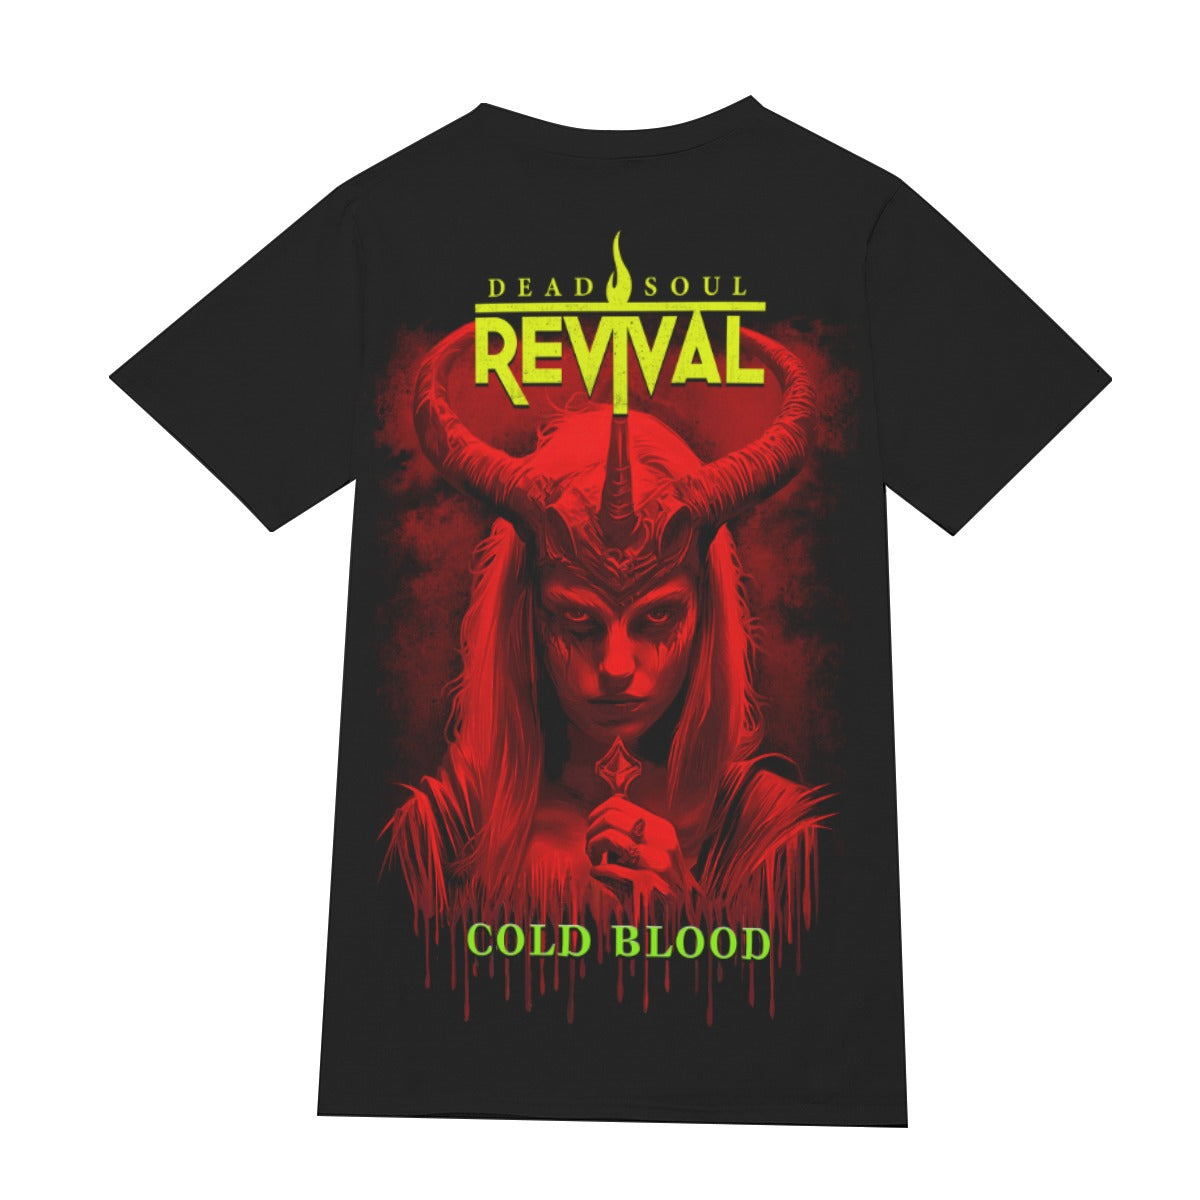 Cold Blood T-Shirt - includes a FREE Instant Download of new single "Cold Blood" mp3!